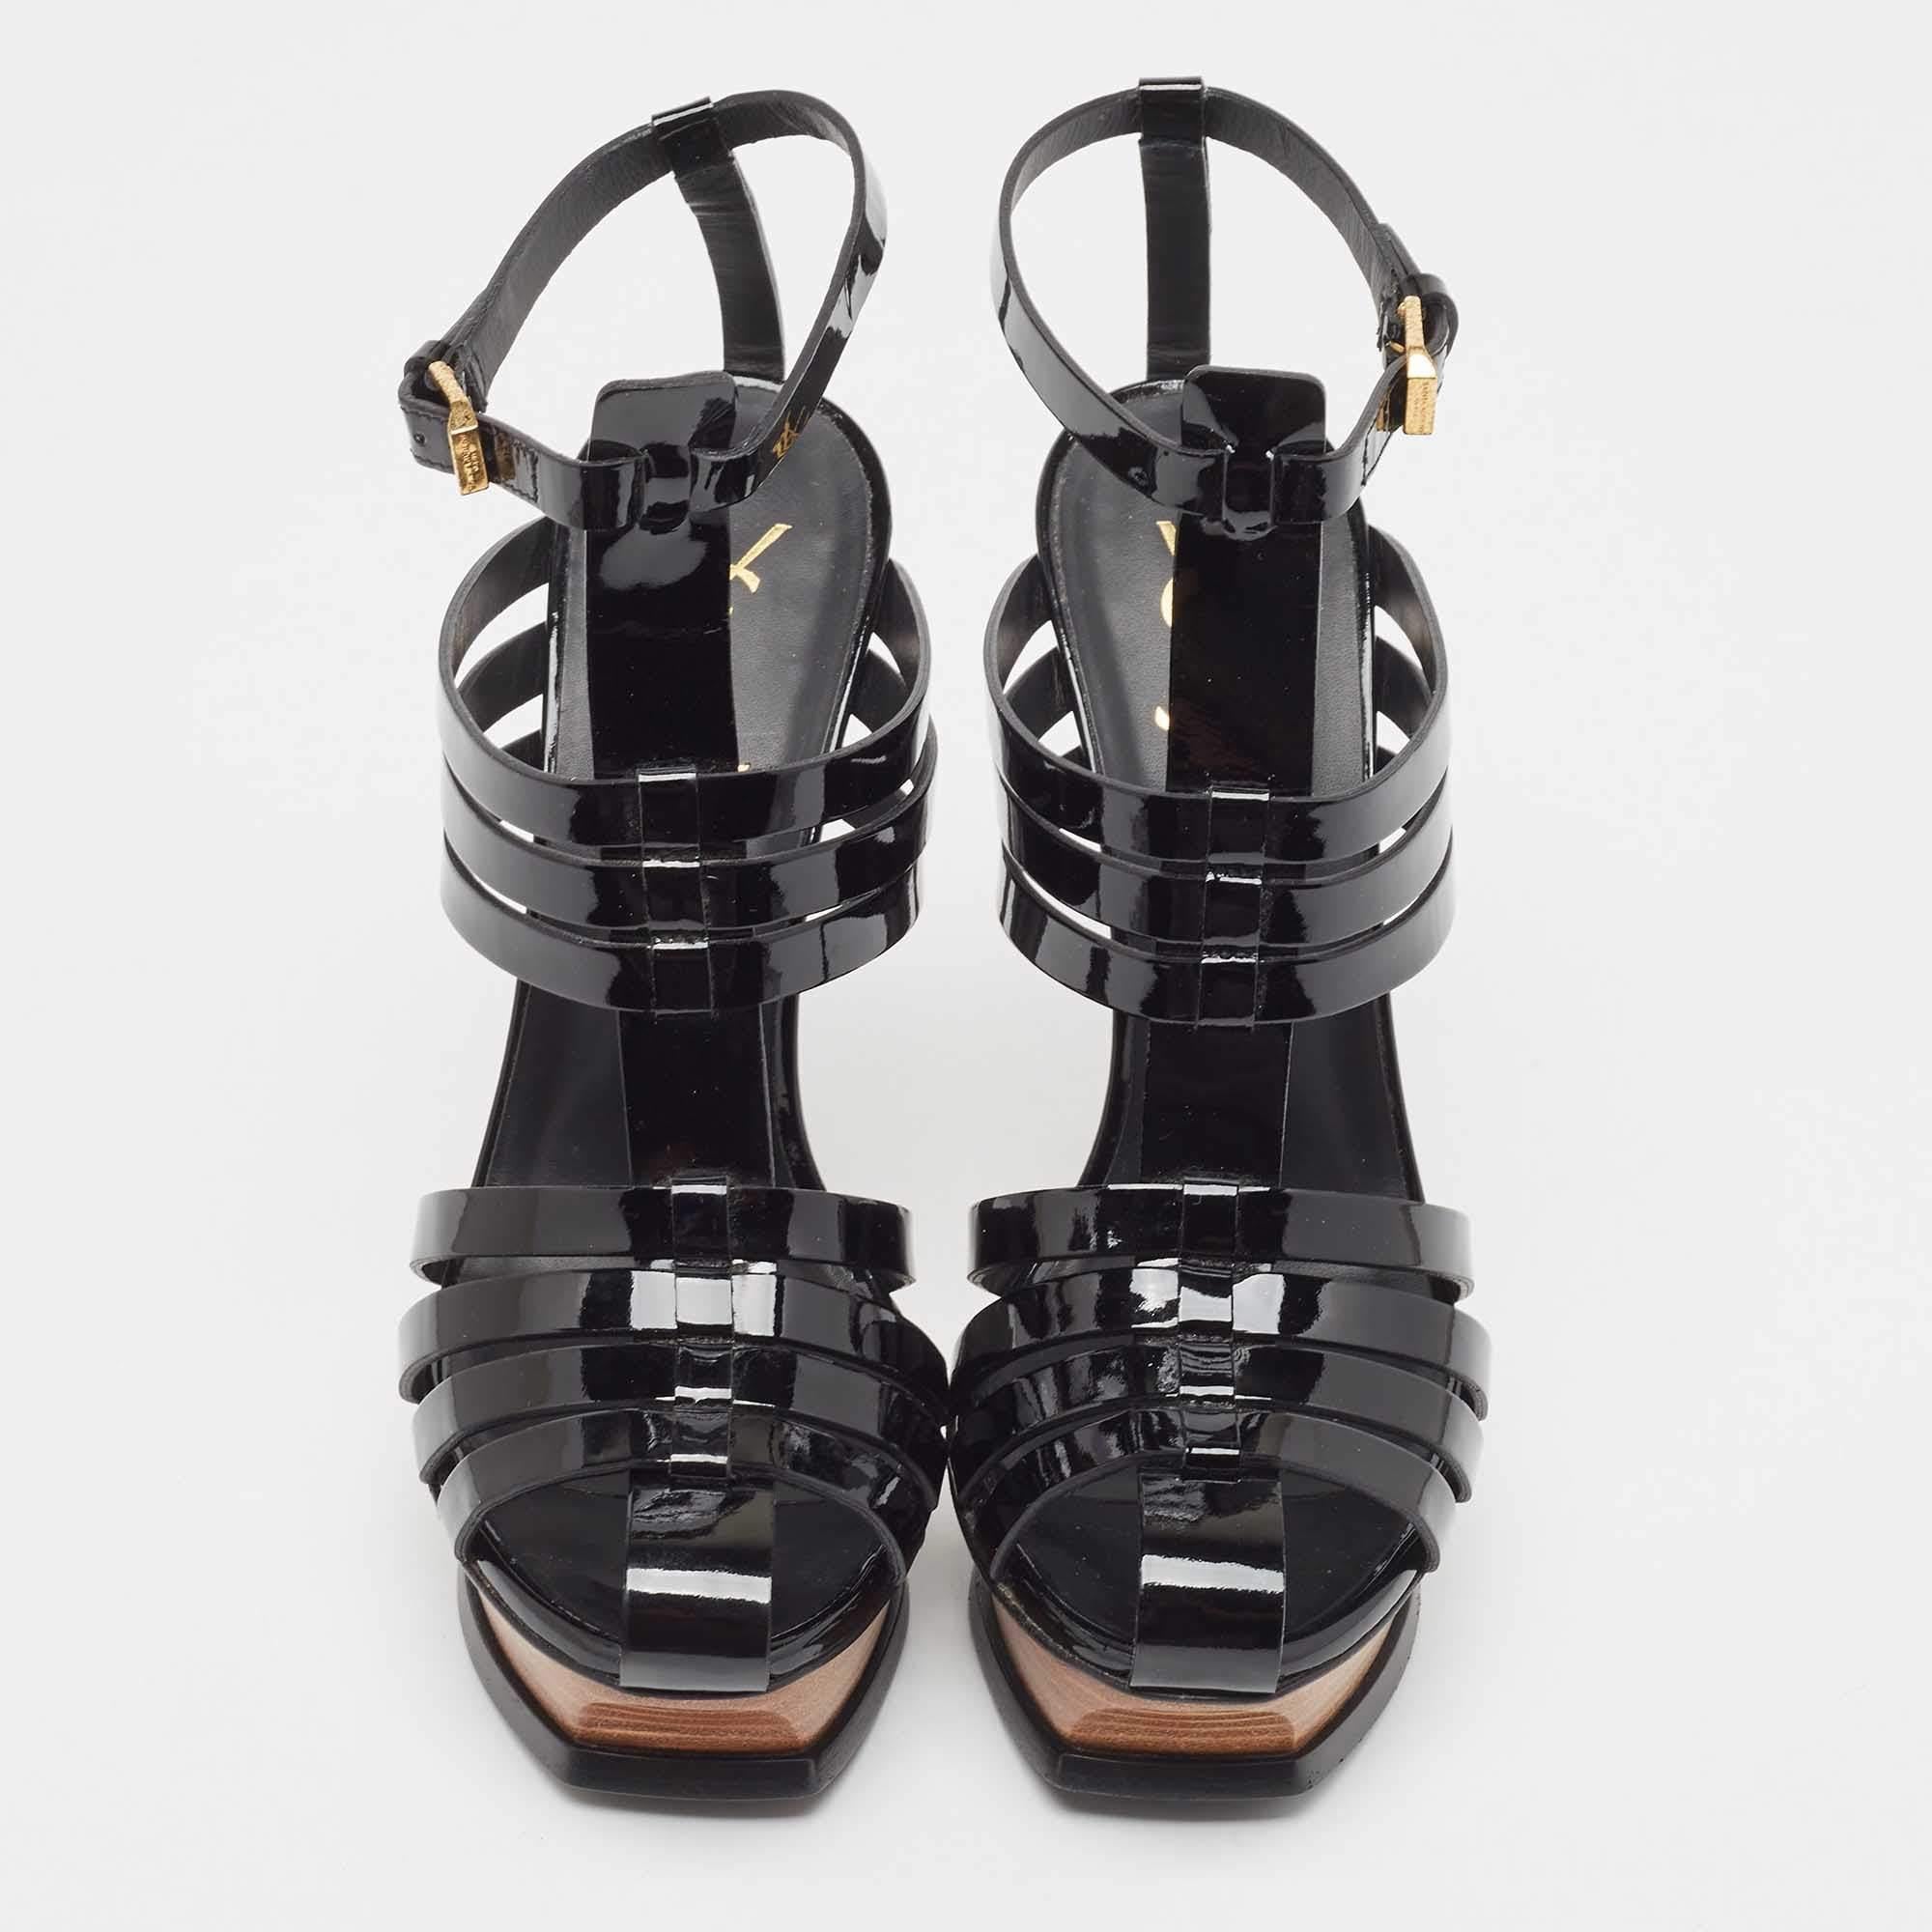 These Saint Laurent sandals are made of patent leather straps, added with gold-tone hardware, and lifted on platforms and 14 cm heels. The black platform sandals for women are secured with buckle closure at the ankles.

Includes: Original Box, Extra